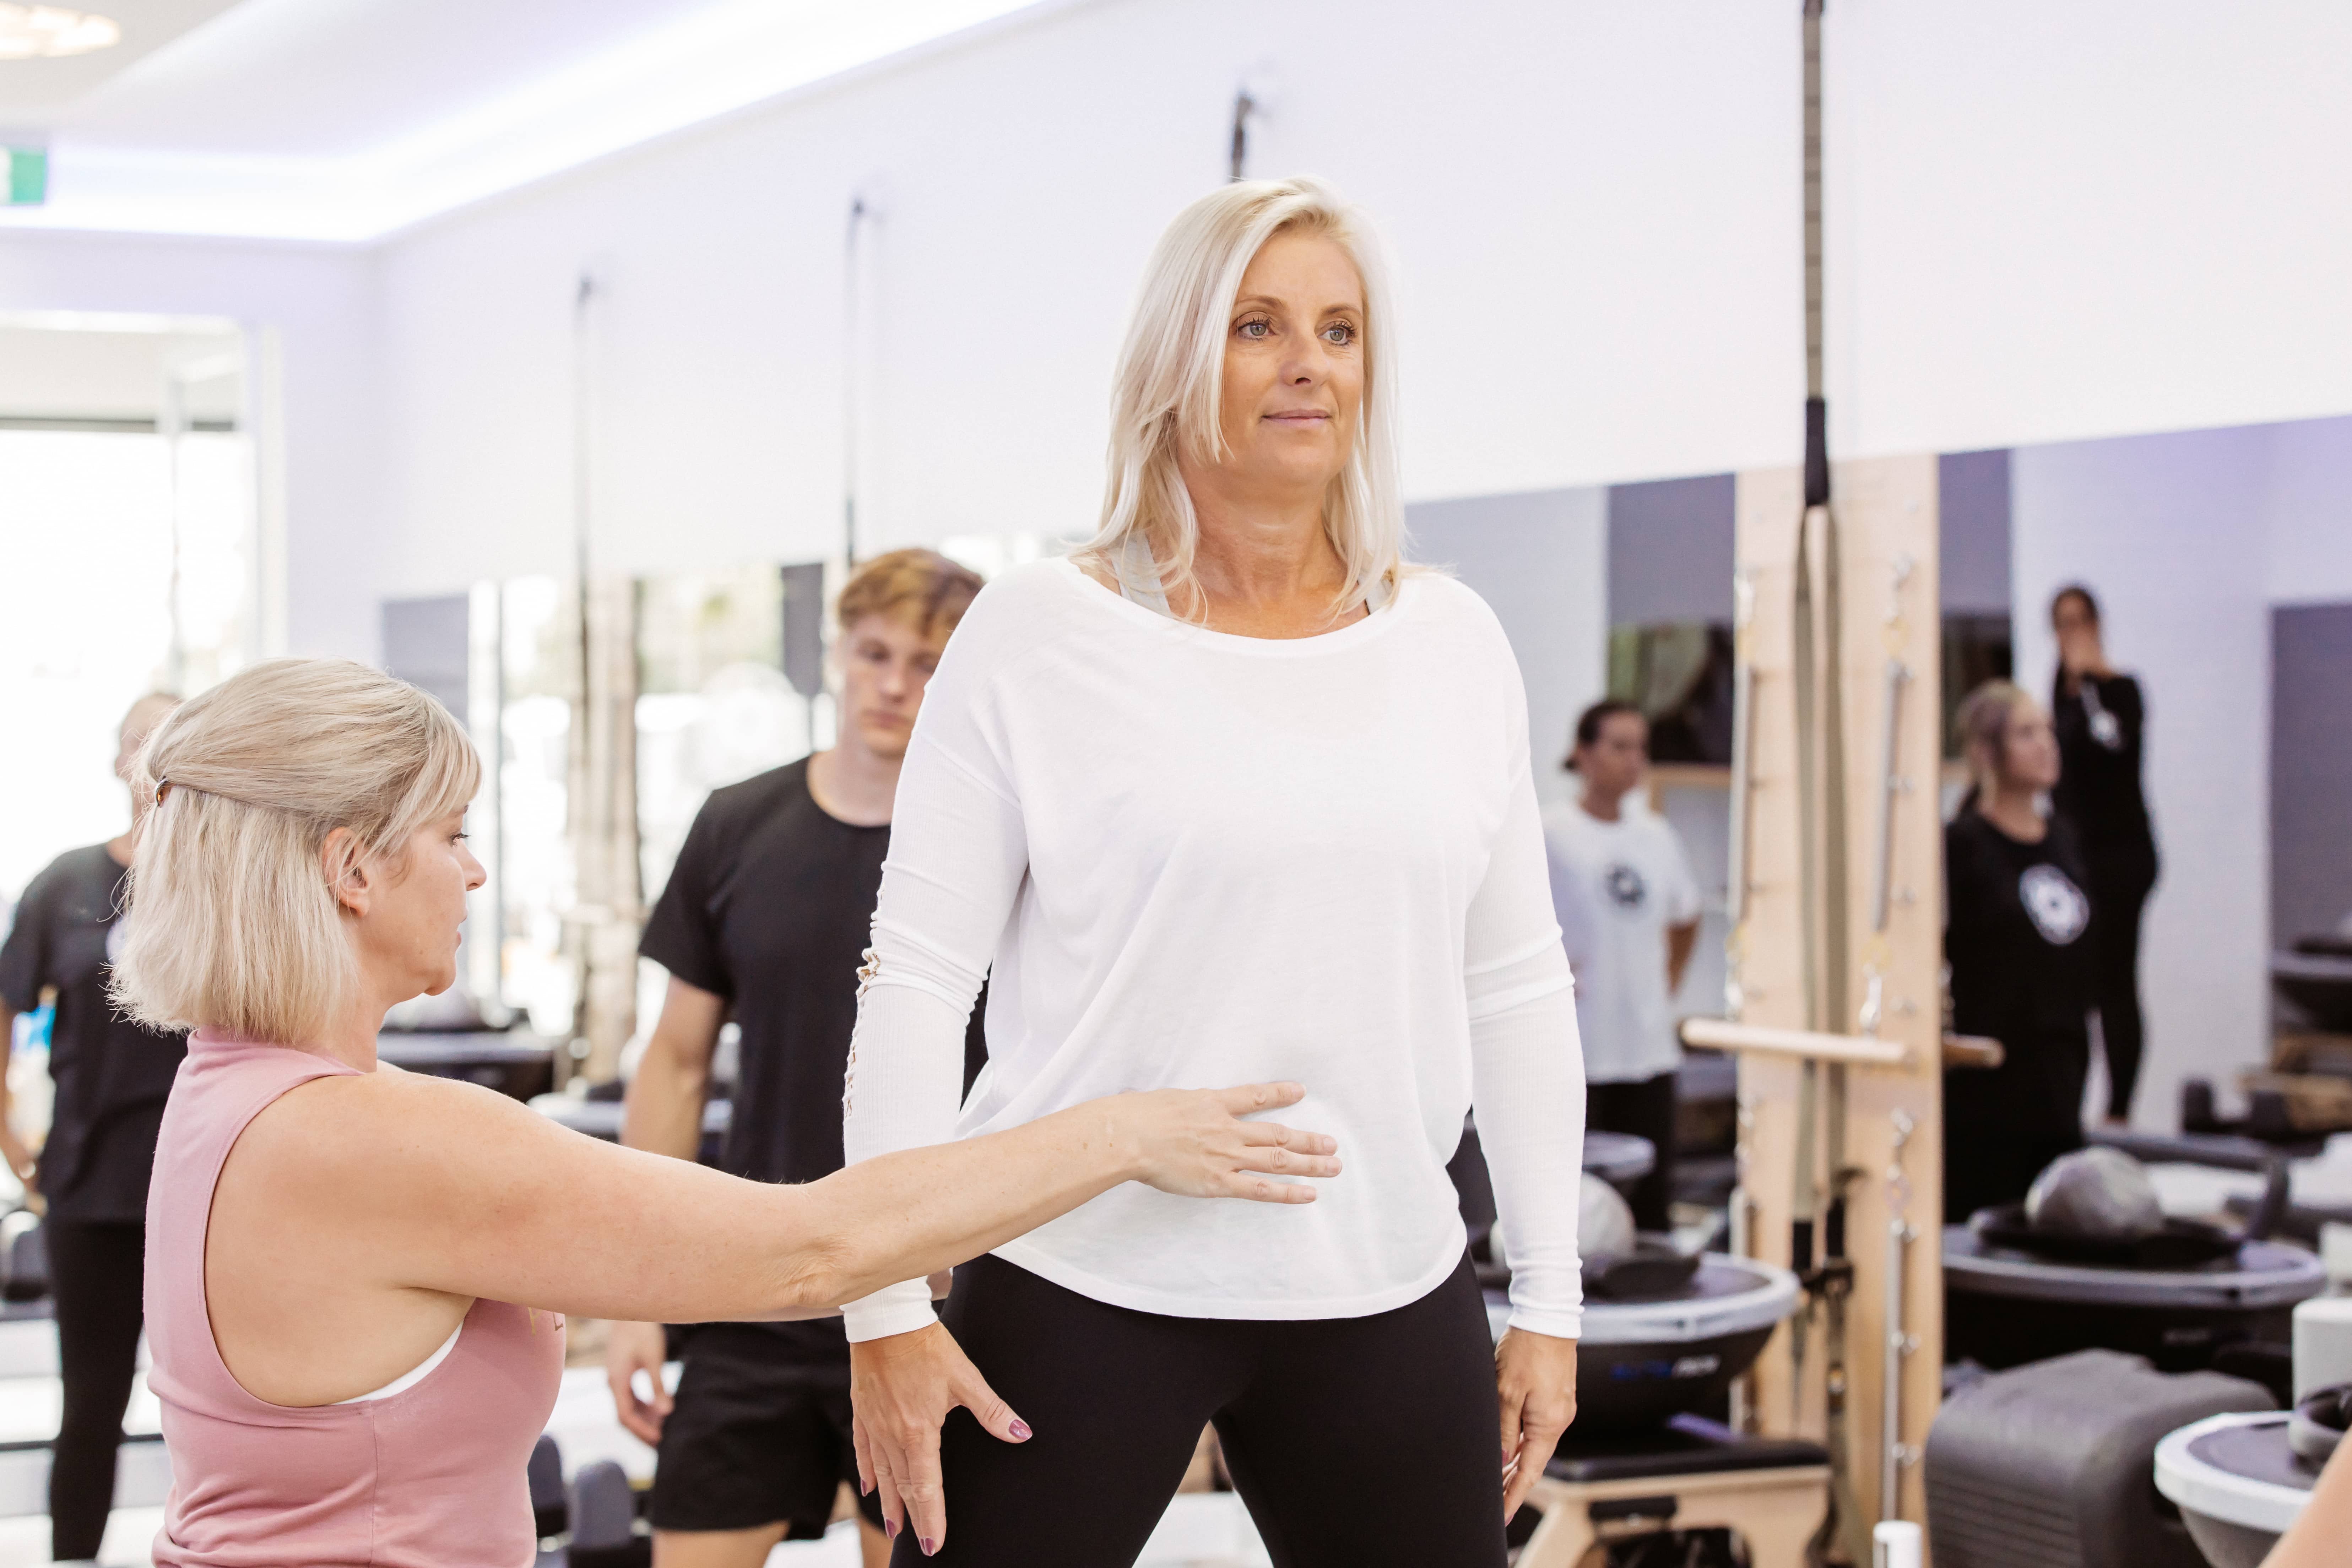 reformer Pilates class in Unley, Adelaide